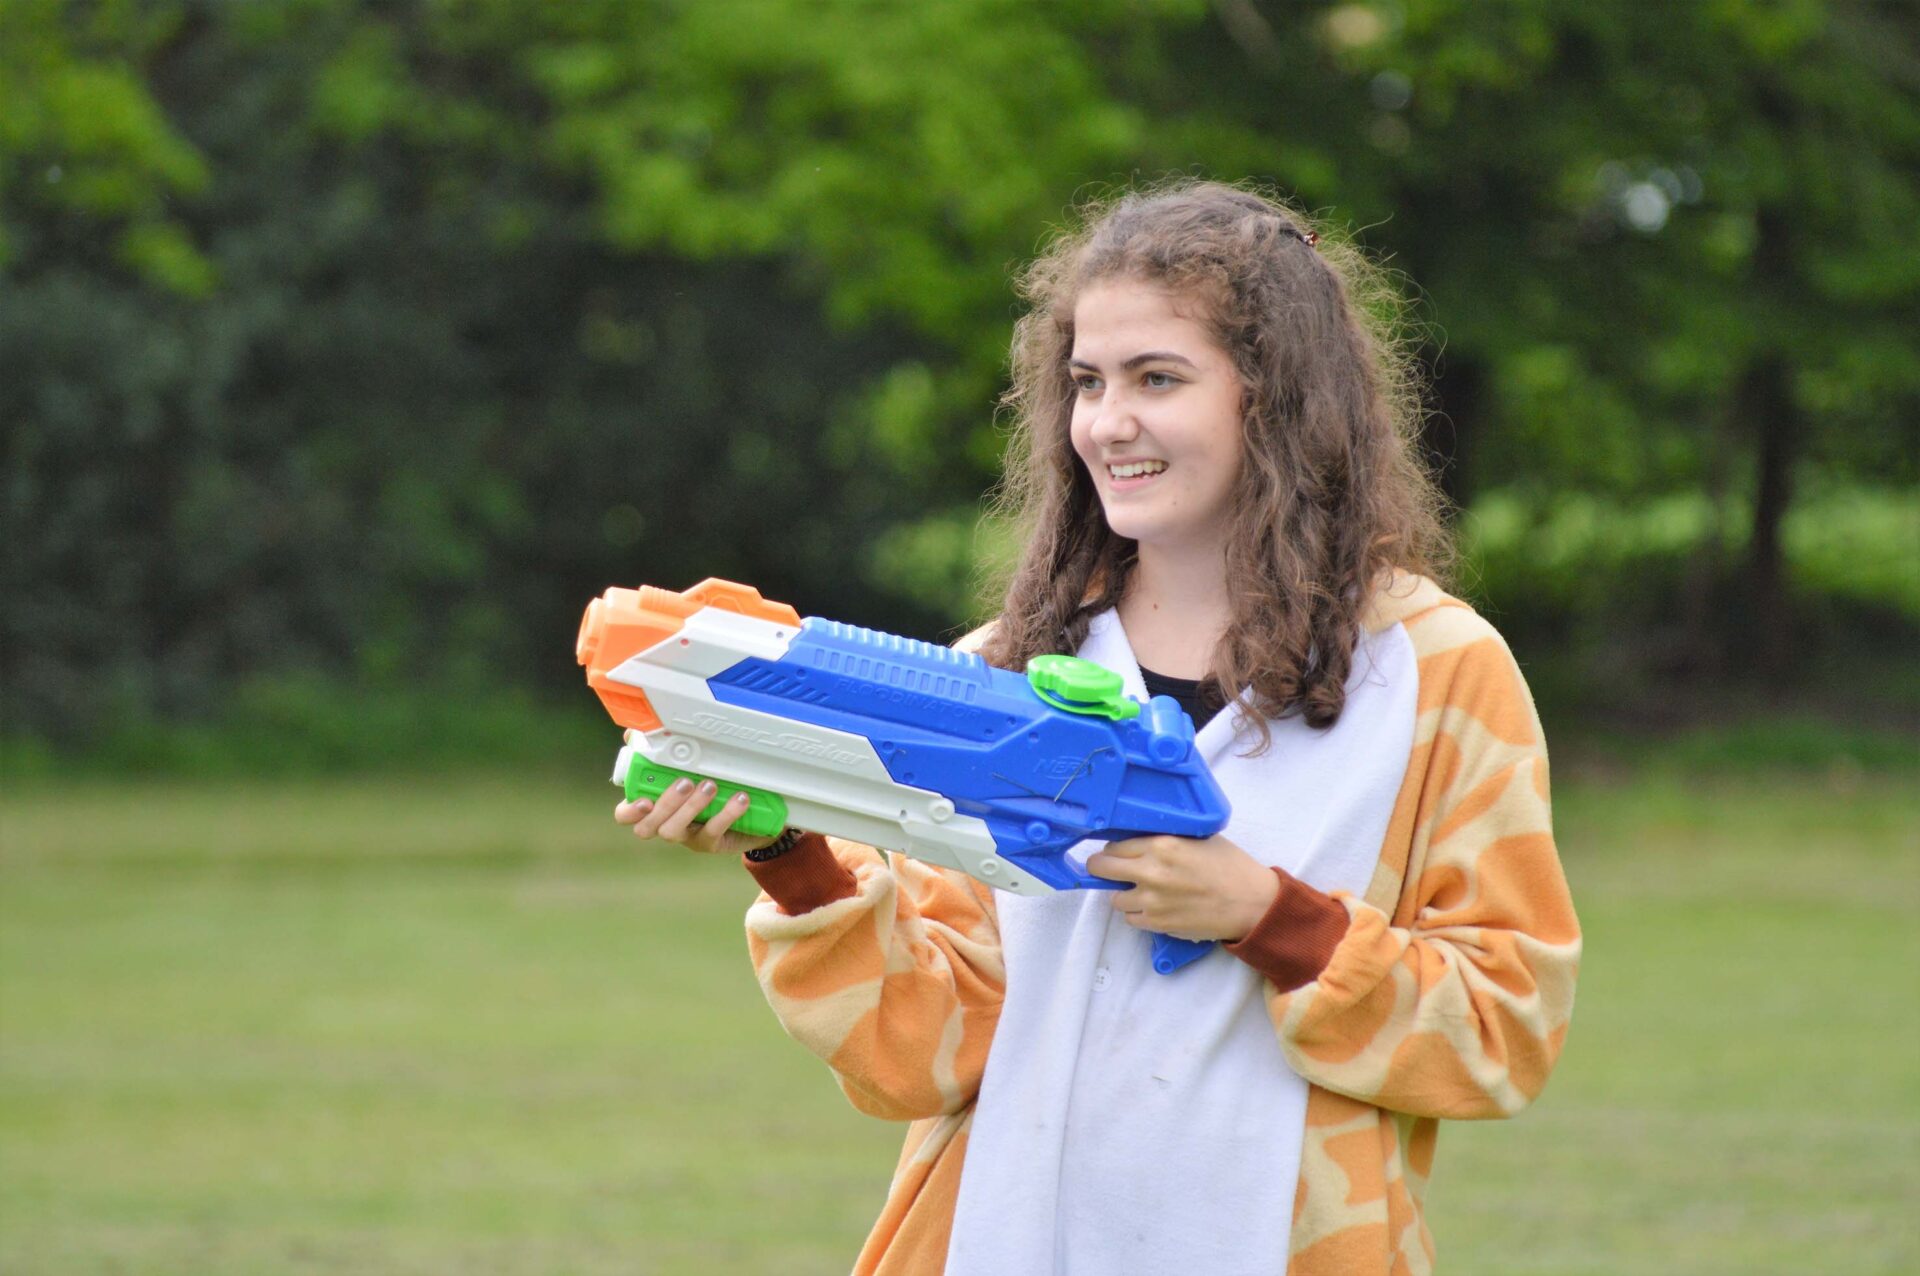 student with a water gun in her hands